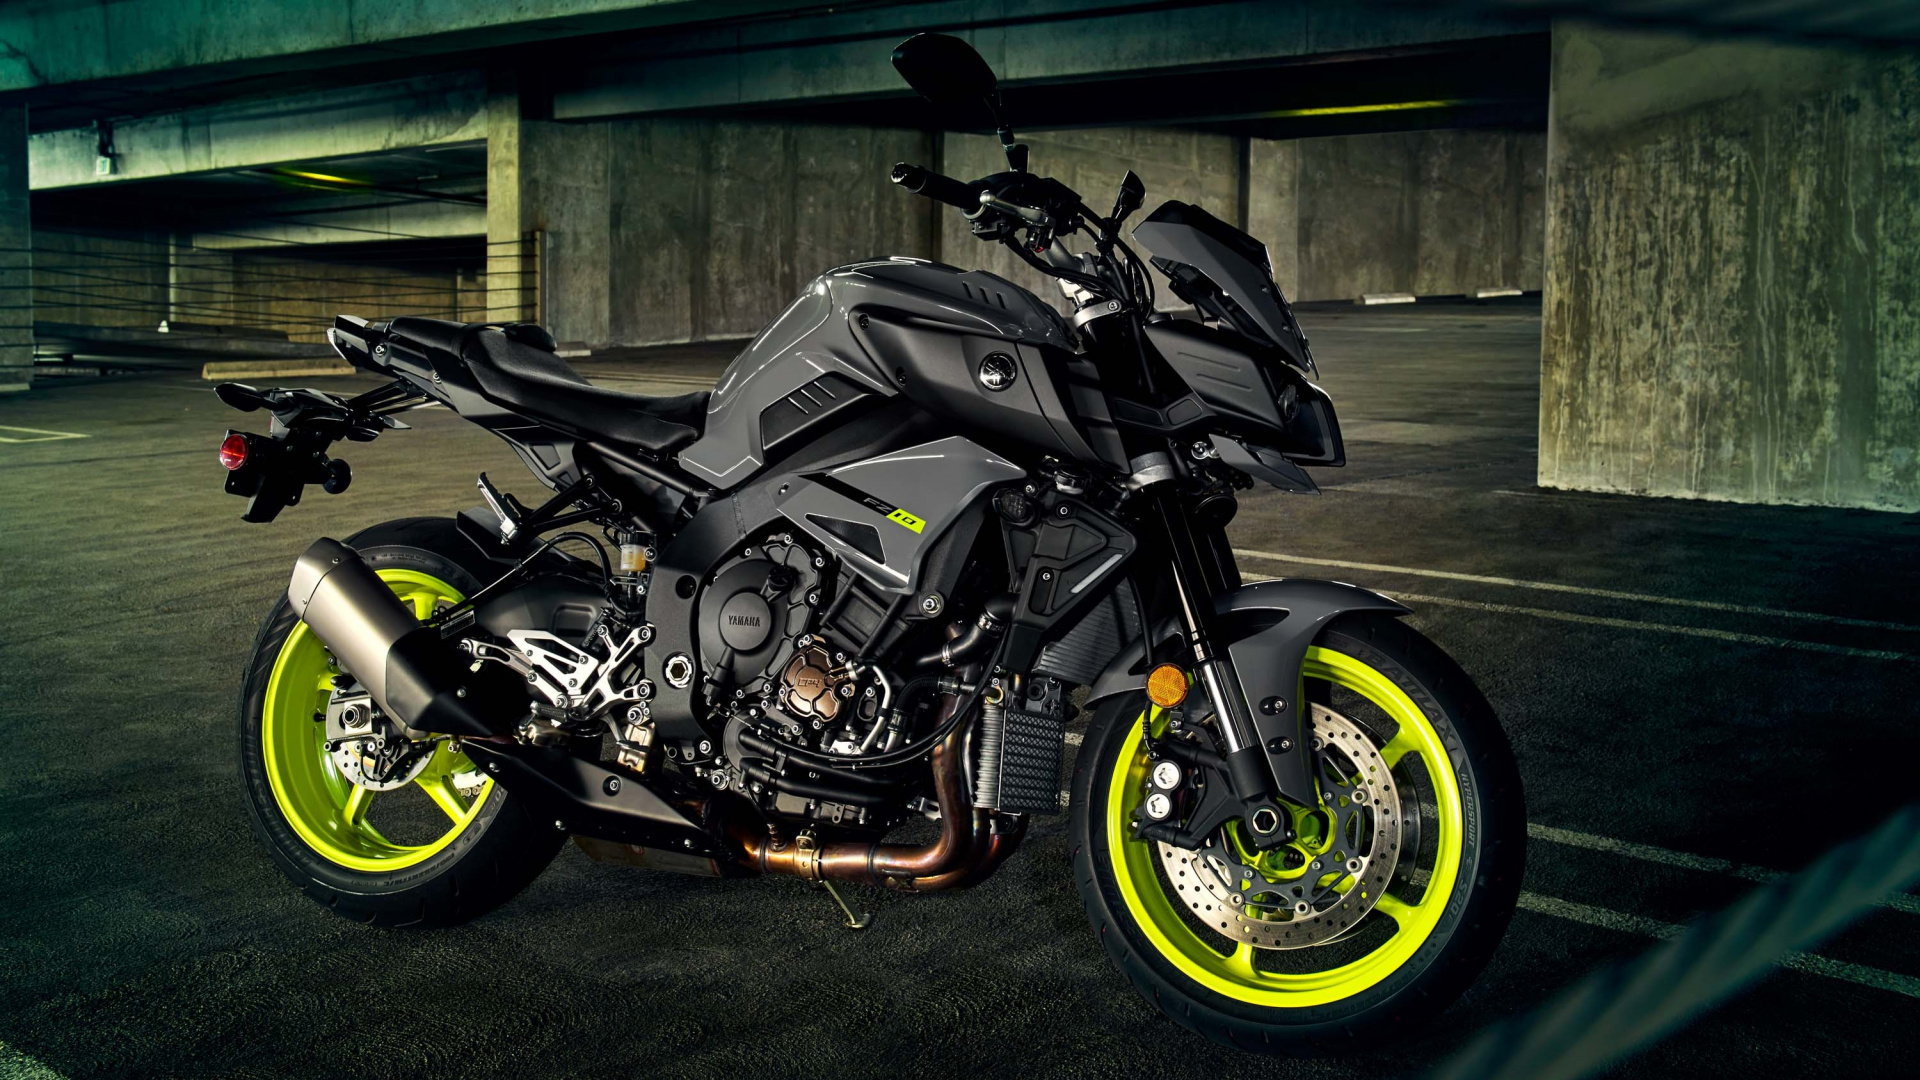 Black and Gray Sports Bike Parked on Gray Concrete Floor. Wallpaper in 1920x1080 Resolution